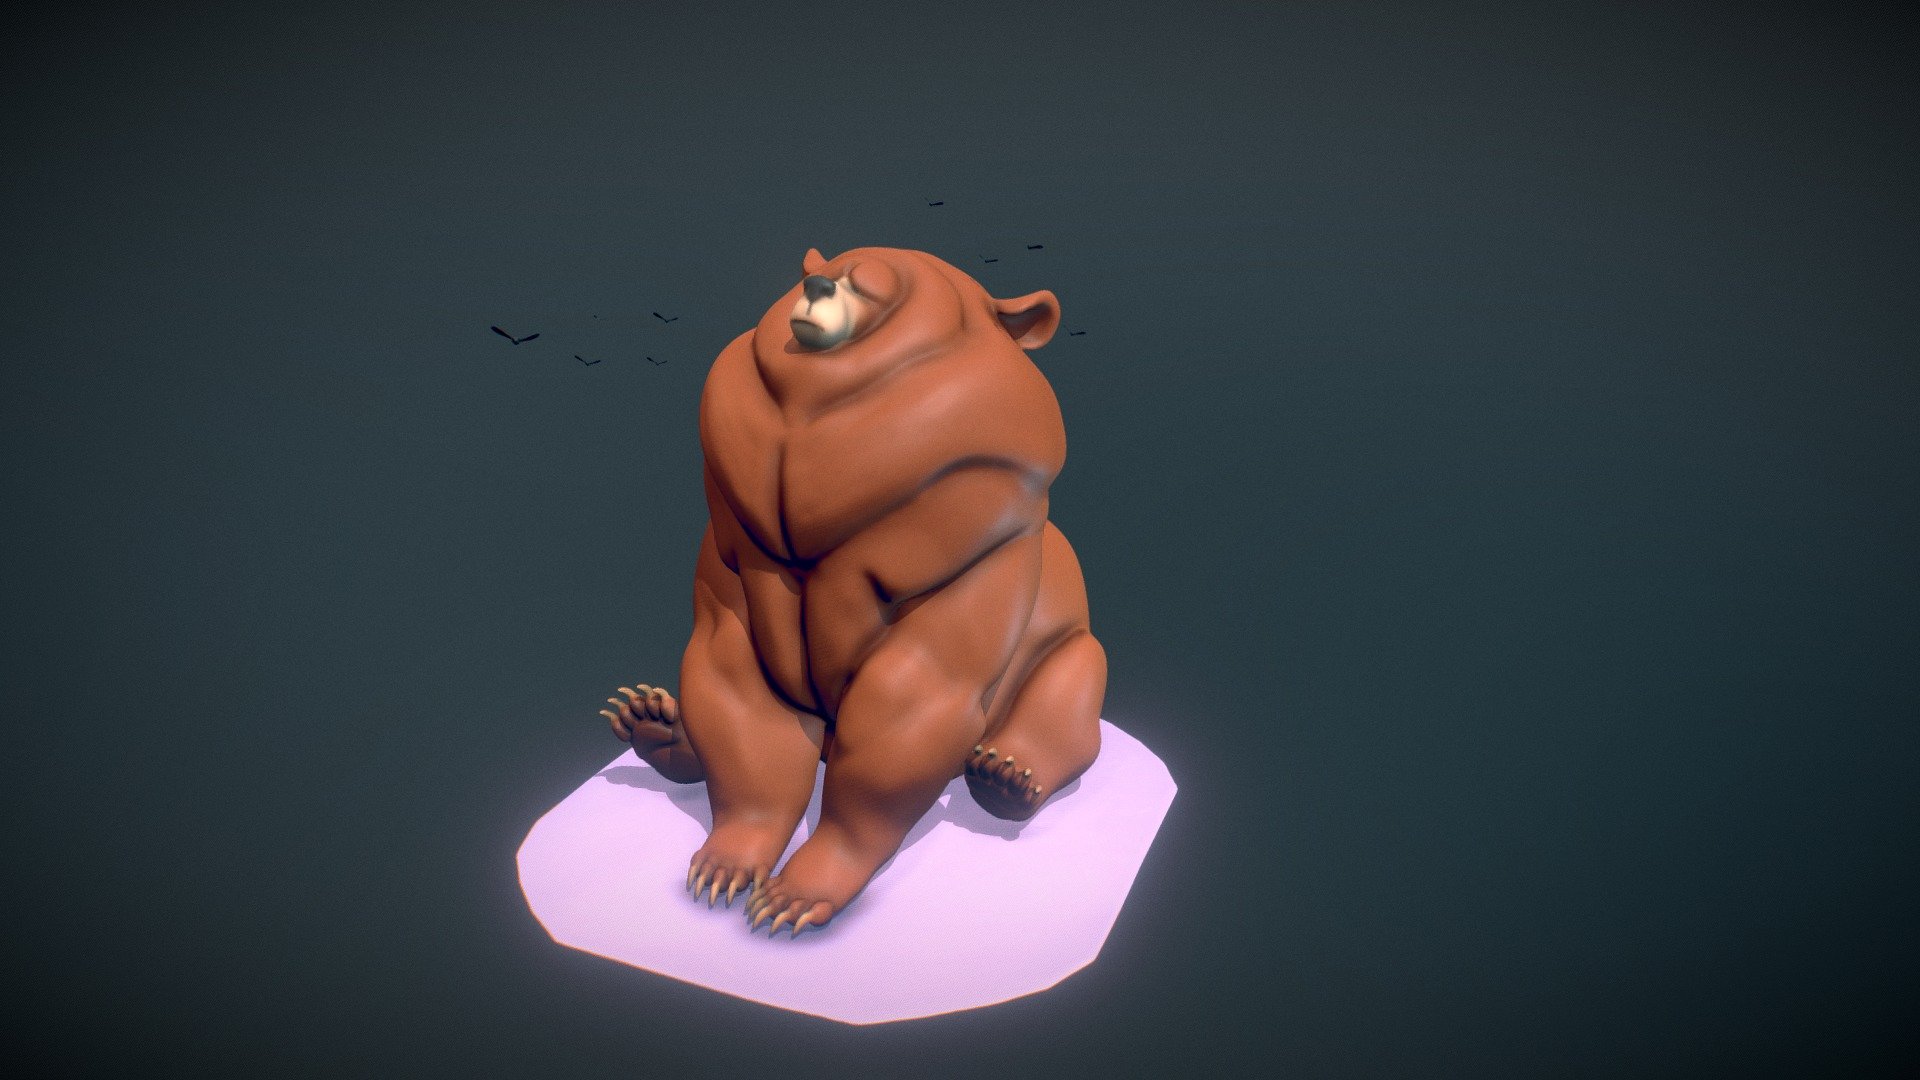 Based off a drawing by Aaron Blaise because it made me laugh

Original image: https://i.pinimg.com/originals/e7/fb/3f/e7fb3fc2f218b2ff592e07ca671b9009.jpg - Fat bear - 3D model by HNicol 3d model